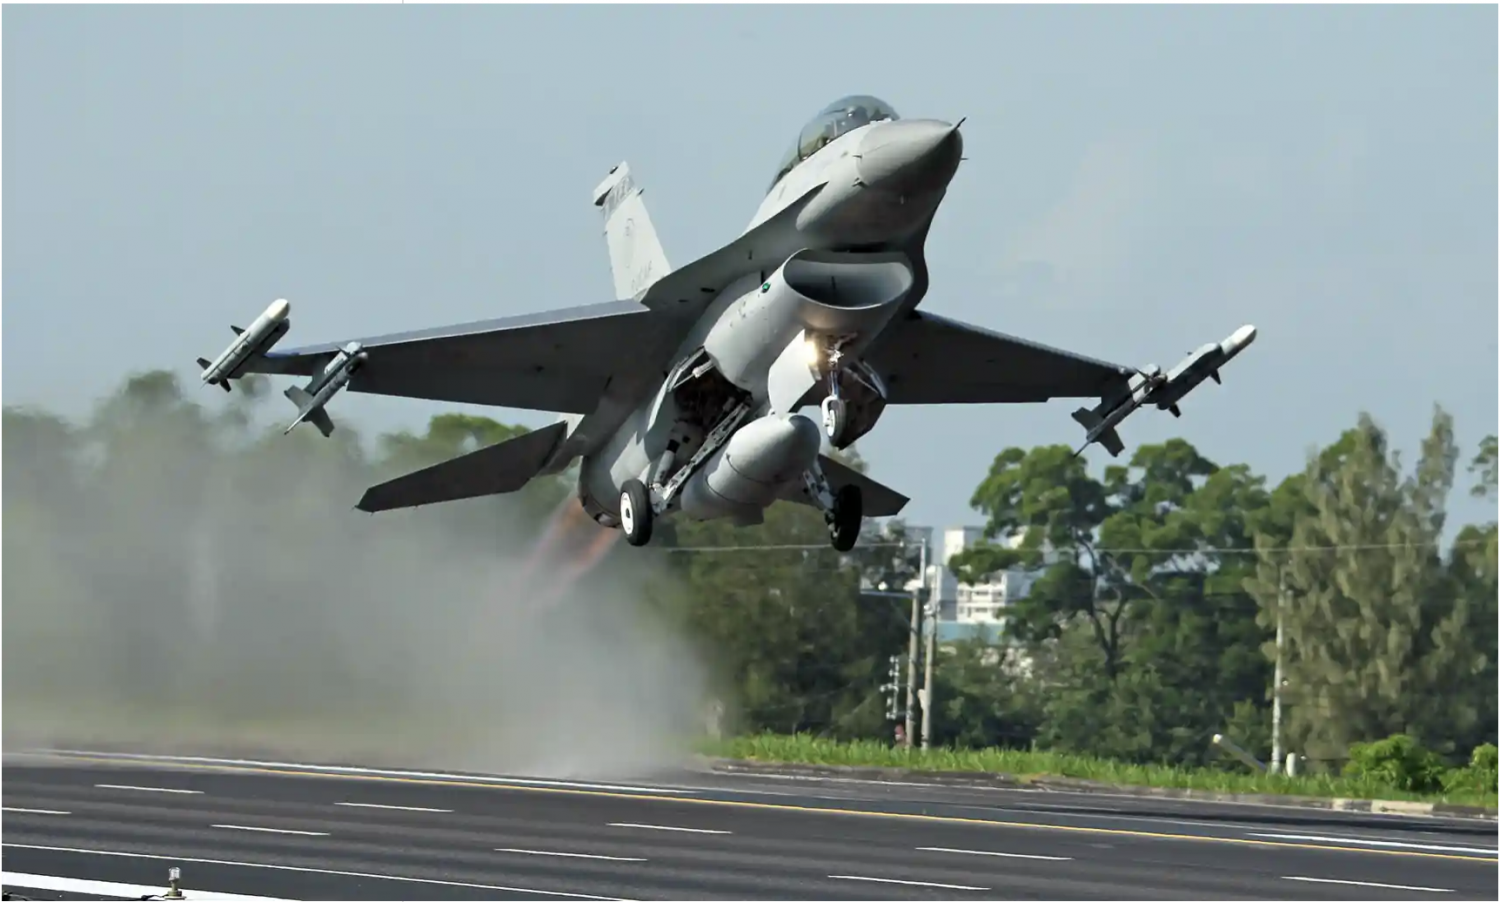 Taiwan is heavily reliant on the US for its defences, such as this F-16 fighter jet. Photograph: Wally Santana/AP